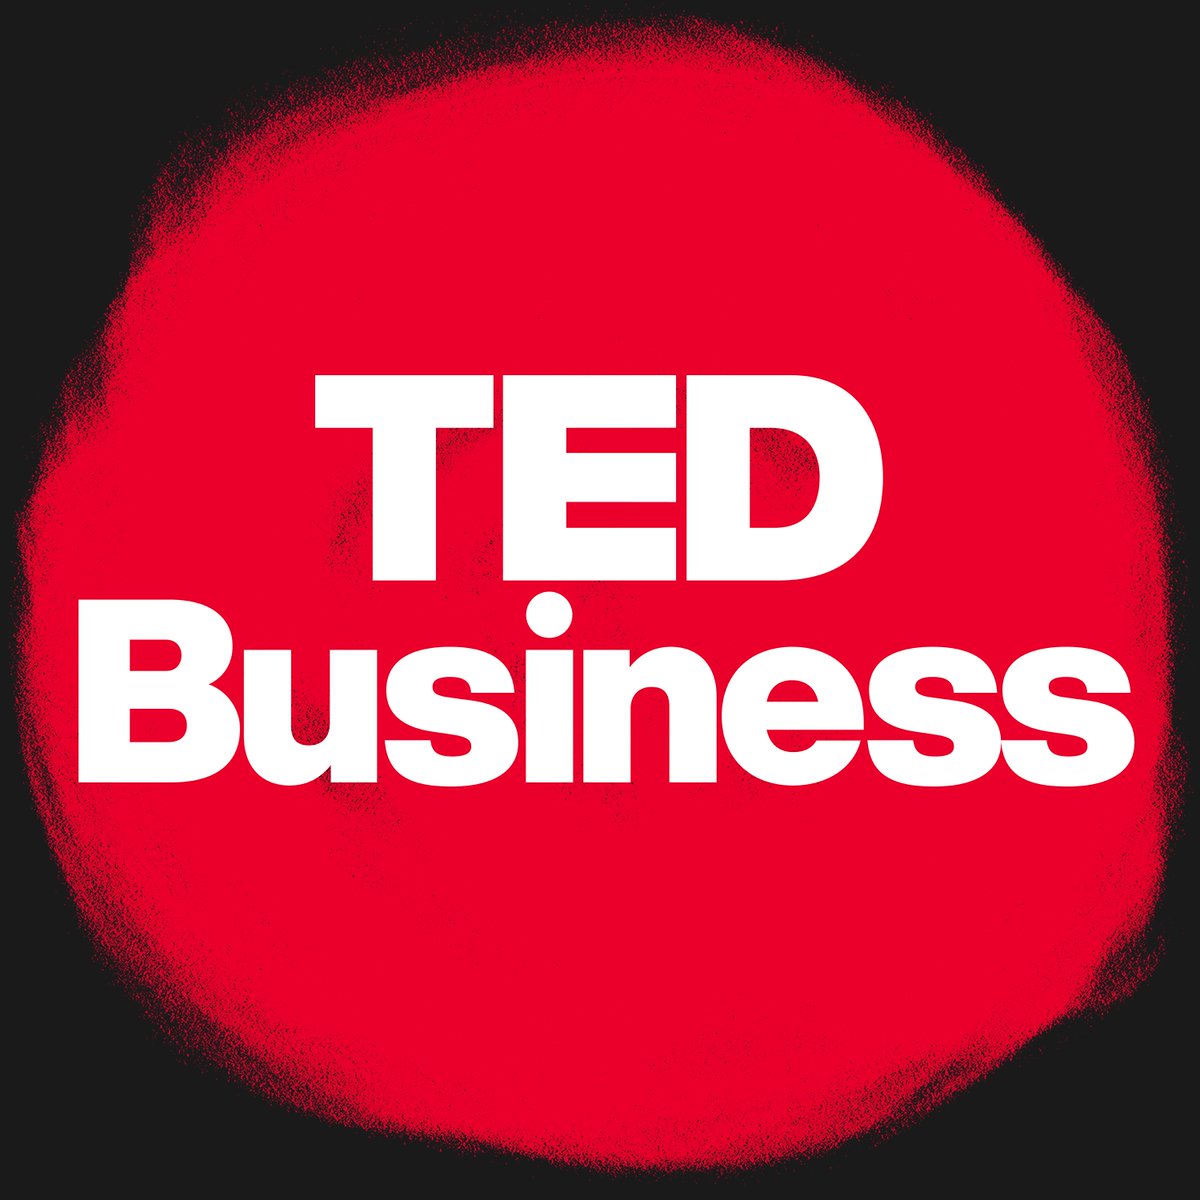 Ever heard of a ghost worker? These “invisible employees” are changing today's job market, and this week on TED Business, researcher @marylgray, discusses what that means for our current social contracts around freelance work. 

#TEDpods

Listen: www8.gsb.columbia.edu/leadership/ted…